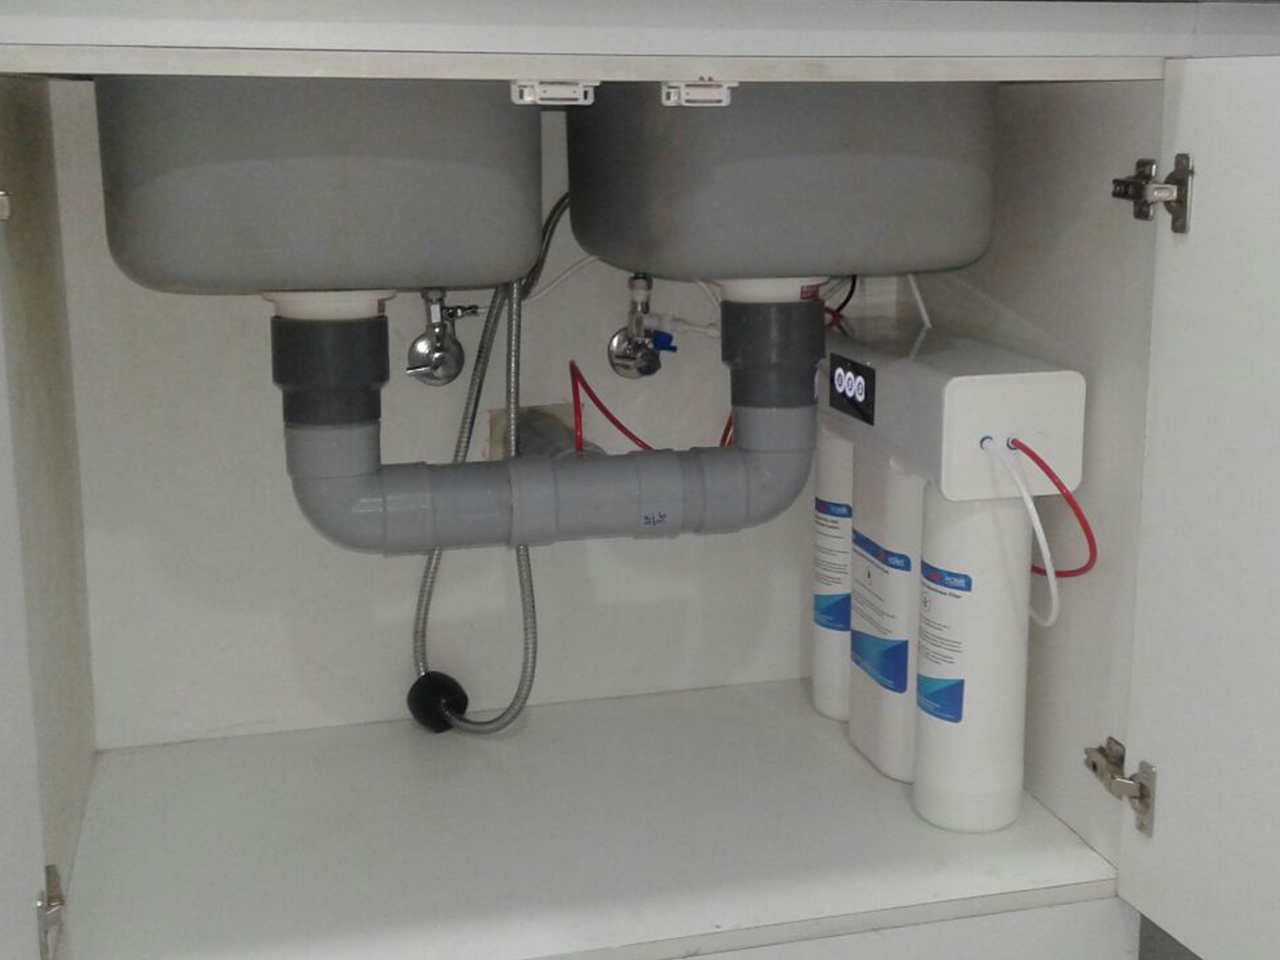 . 3M RO unit at under sink and faucet on right side